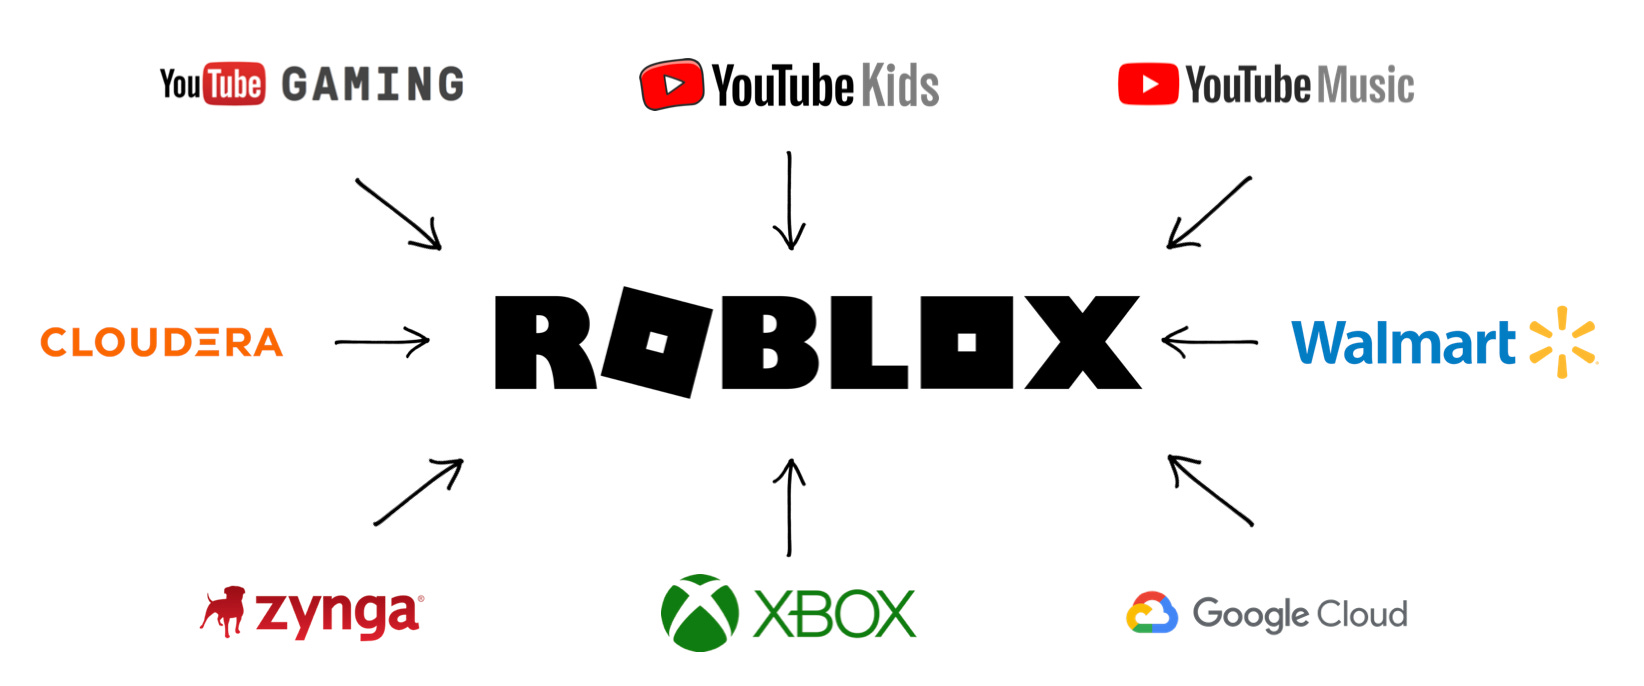 File:Robloxlogo2019.png - Wikimedia Commons